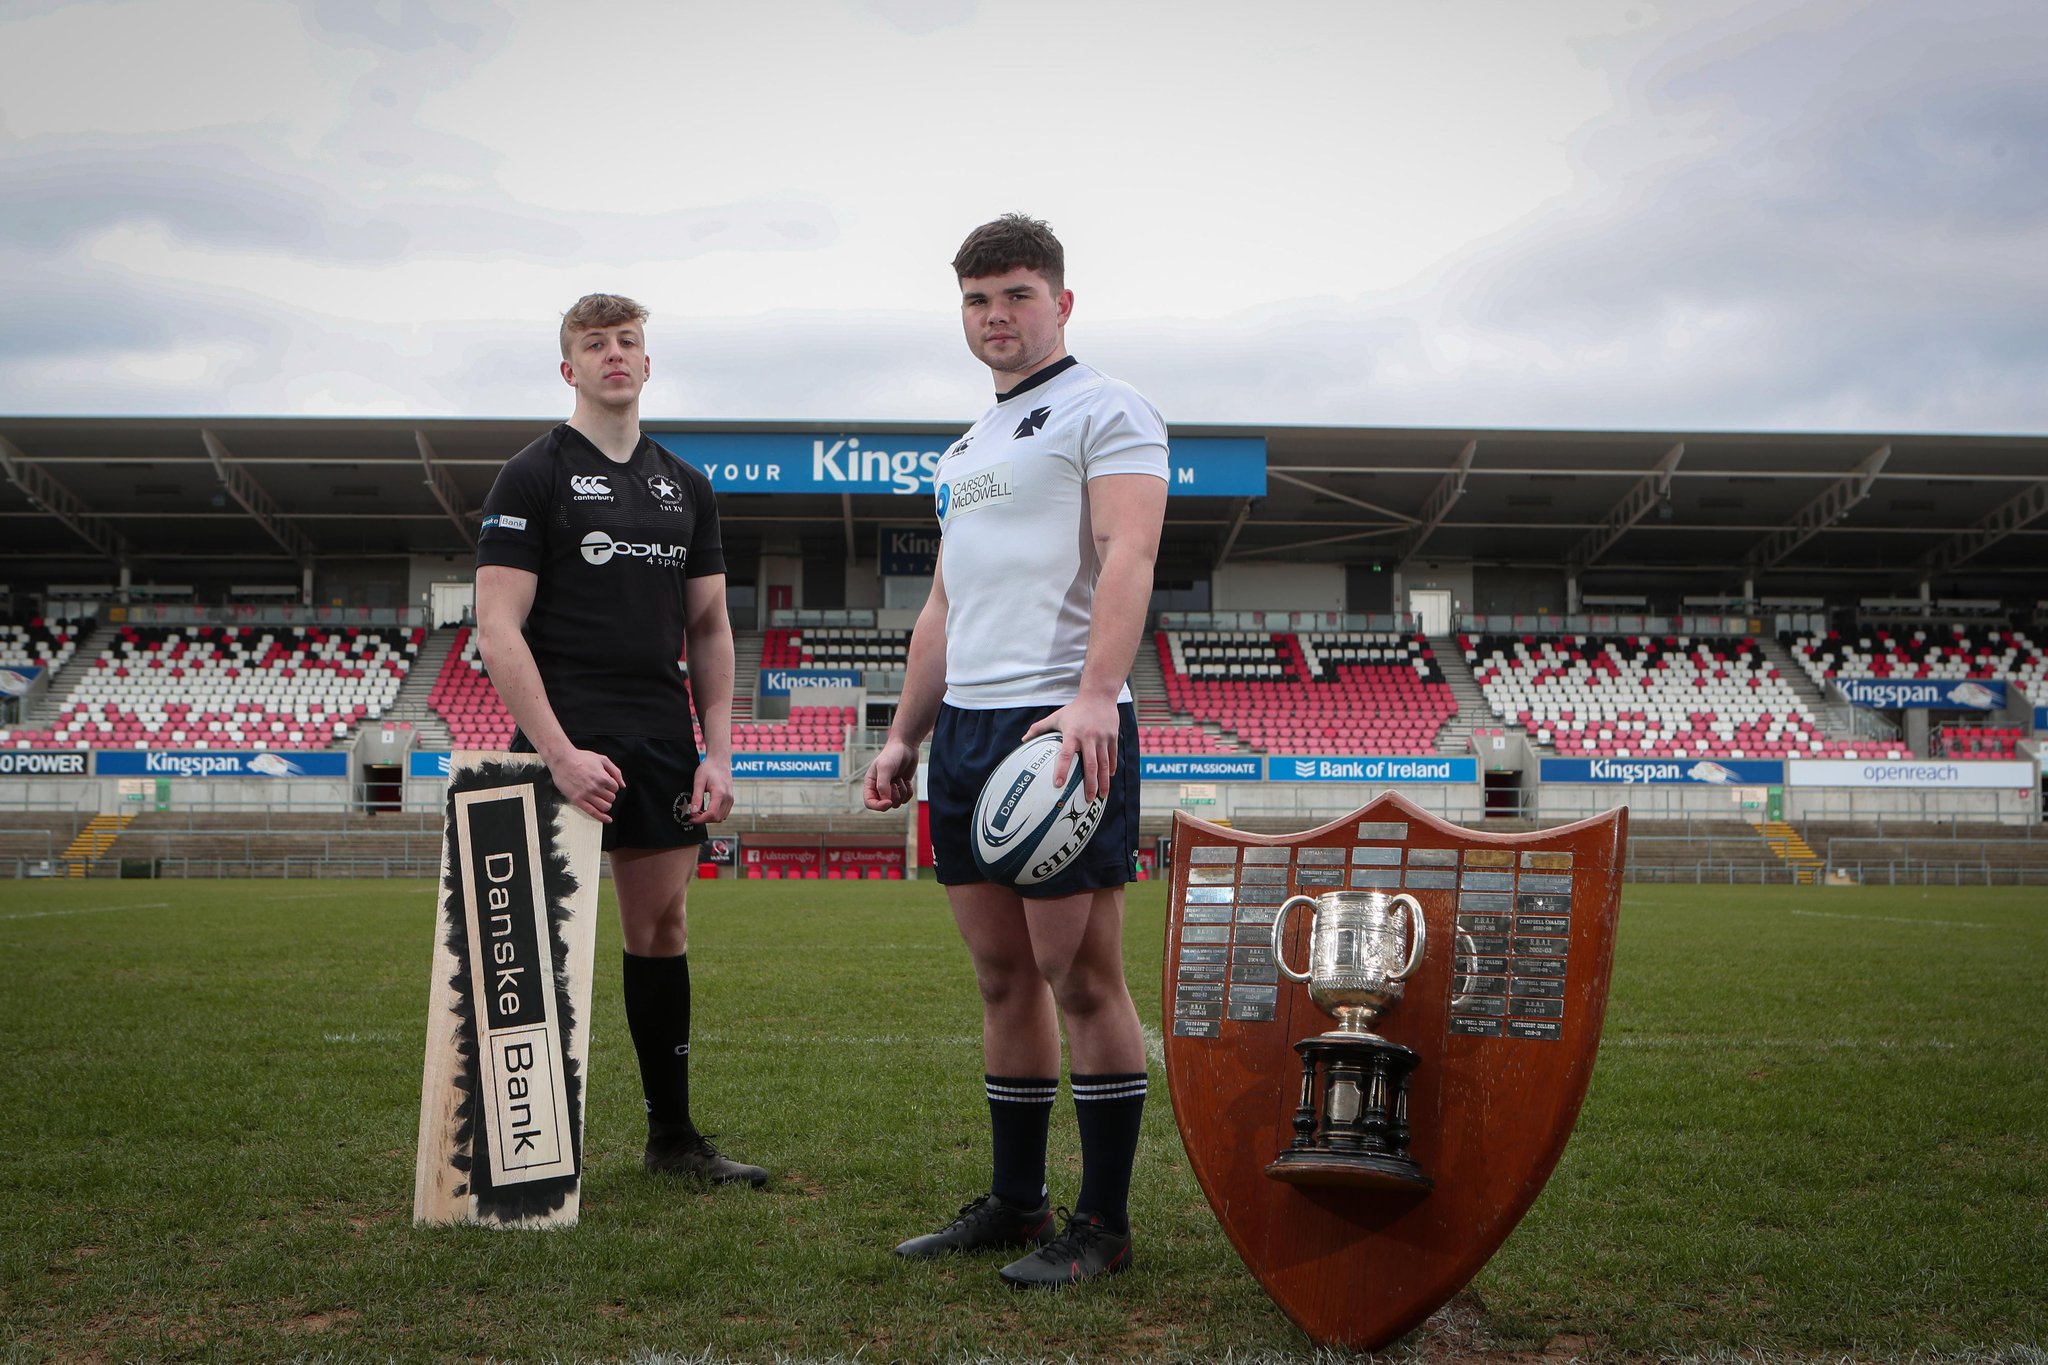 Stage set for Schools' Cup Final as Methody and Campbell clash at Kingspan